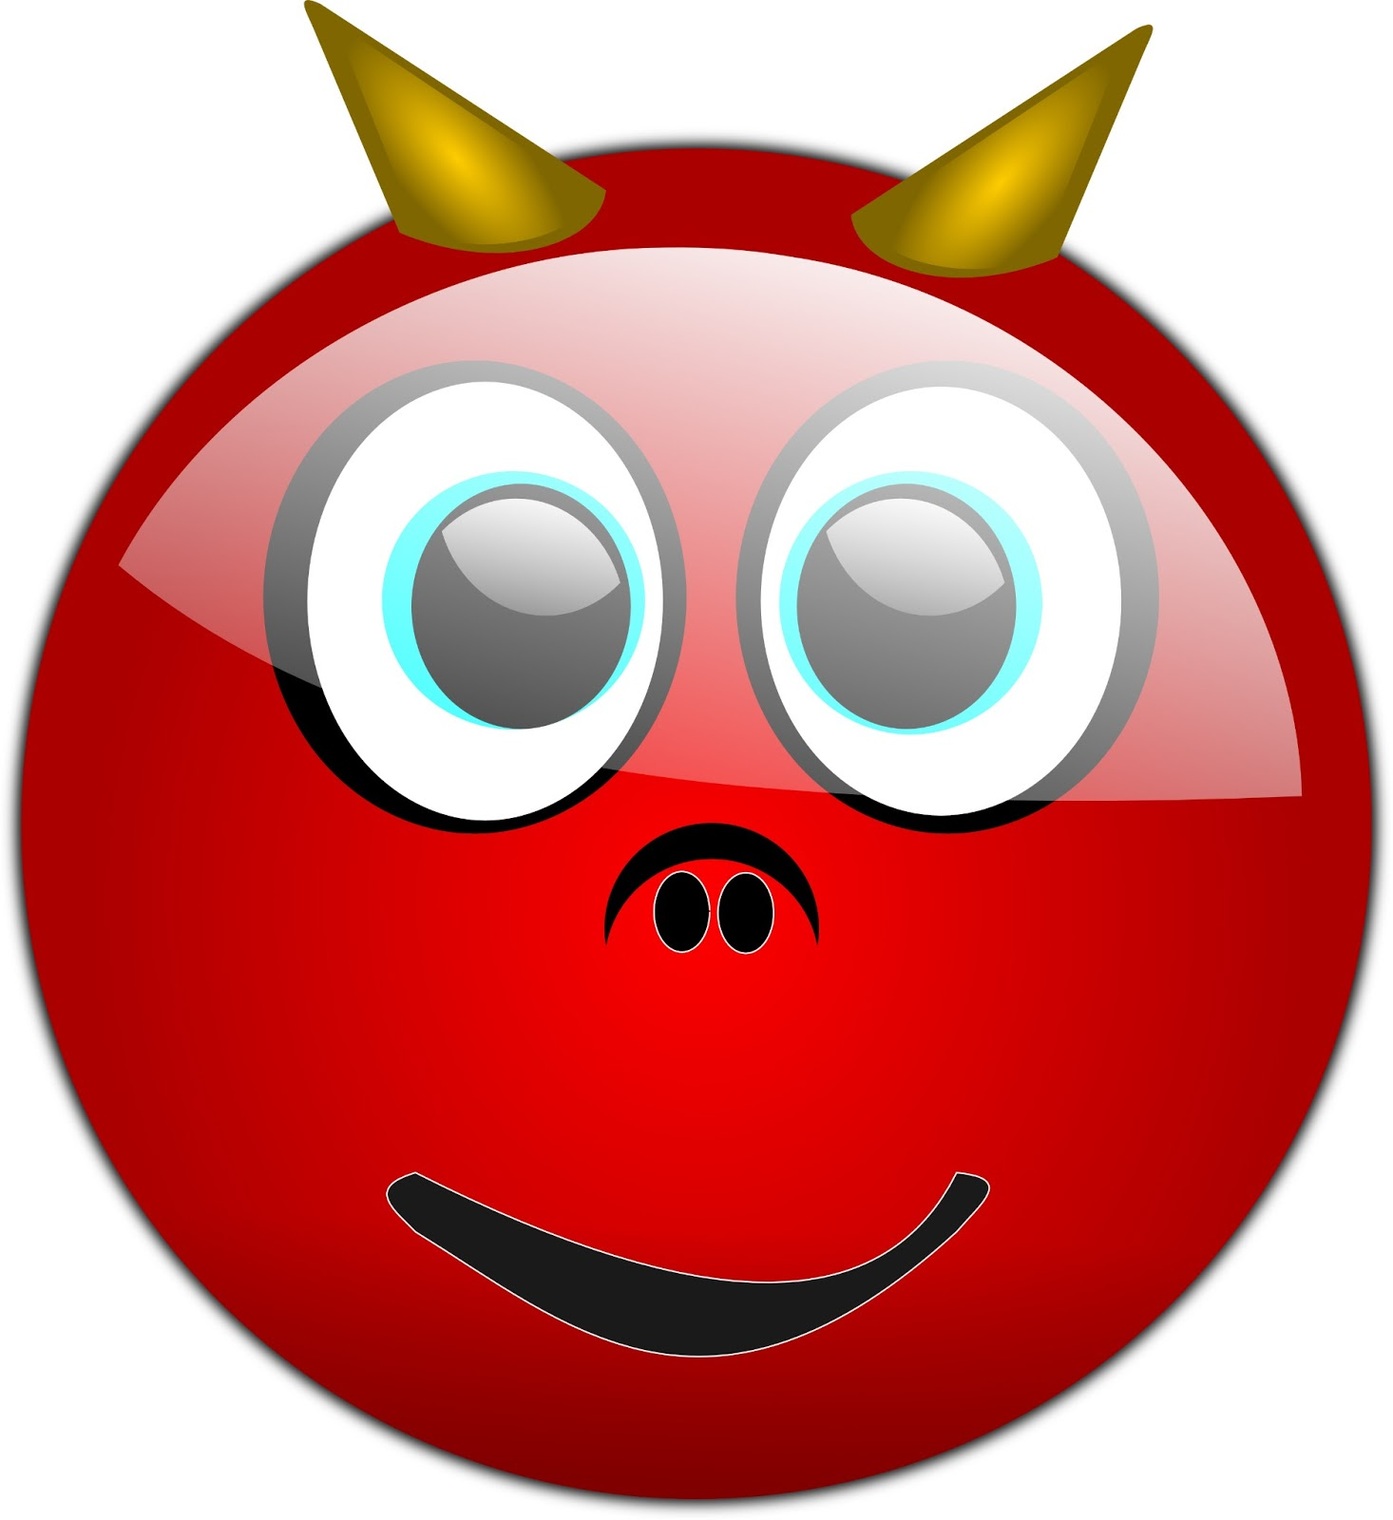 Red Smiley Face Clip Art Clipart - Free to use Clip Art Resource